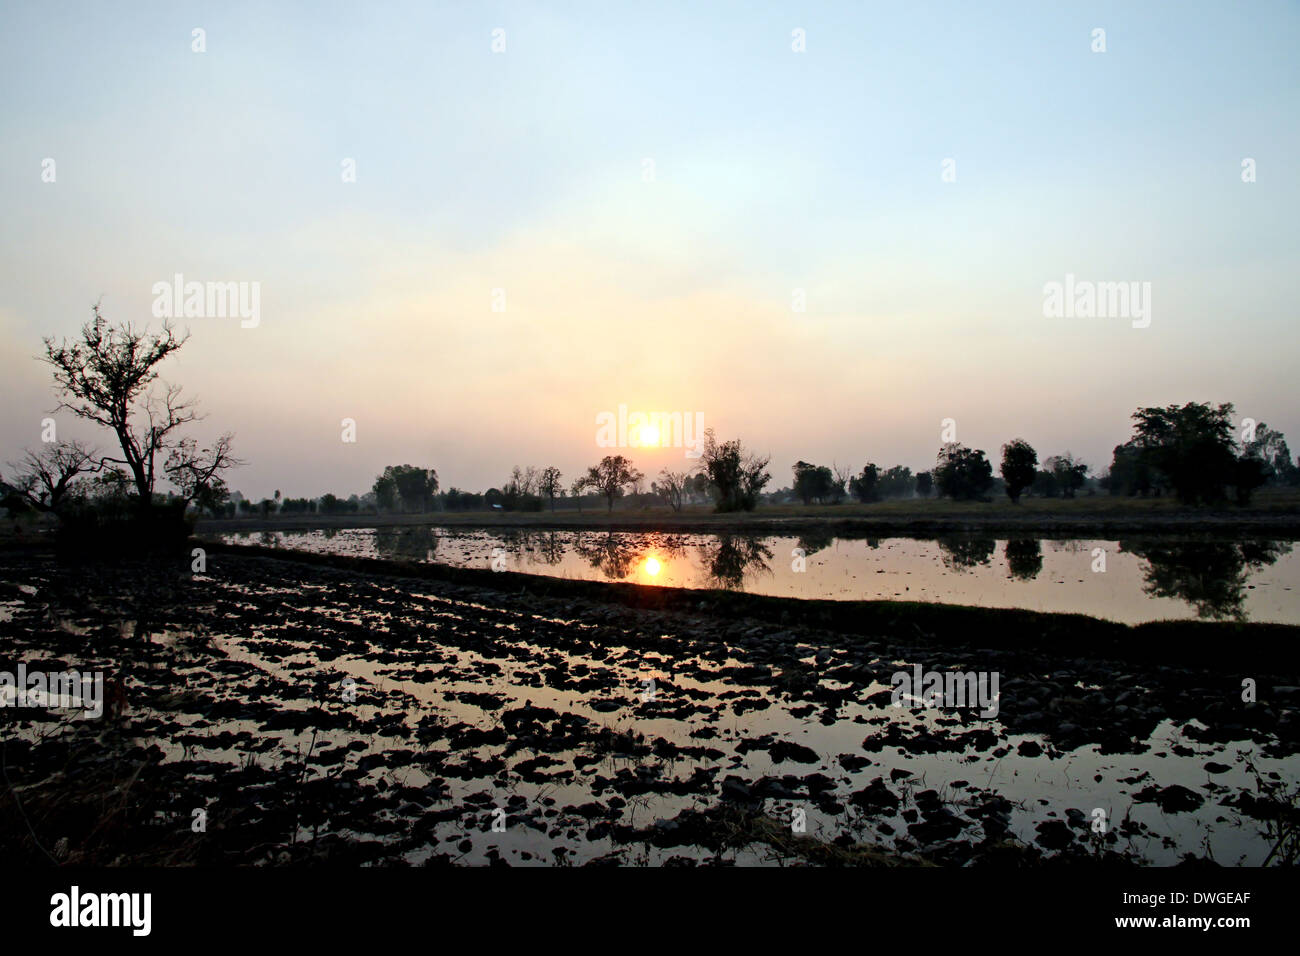 Sunset at the rice farm and light orange reflection on water. Stock Photo